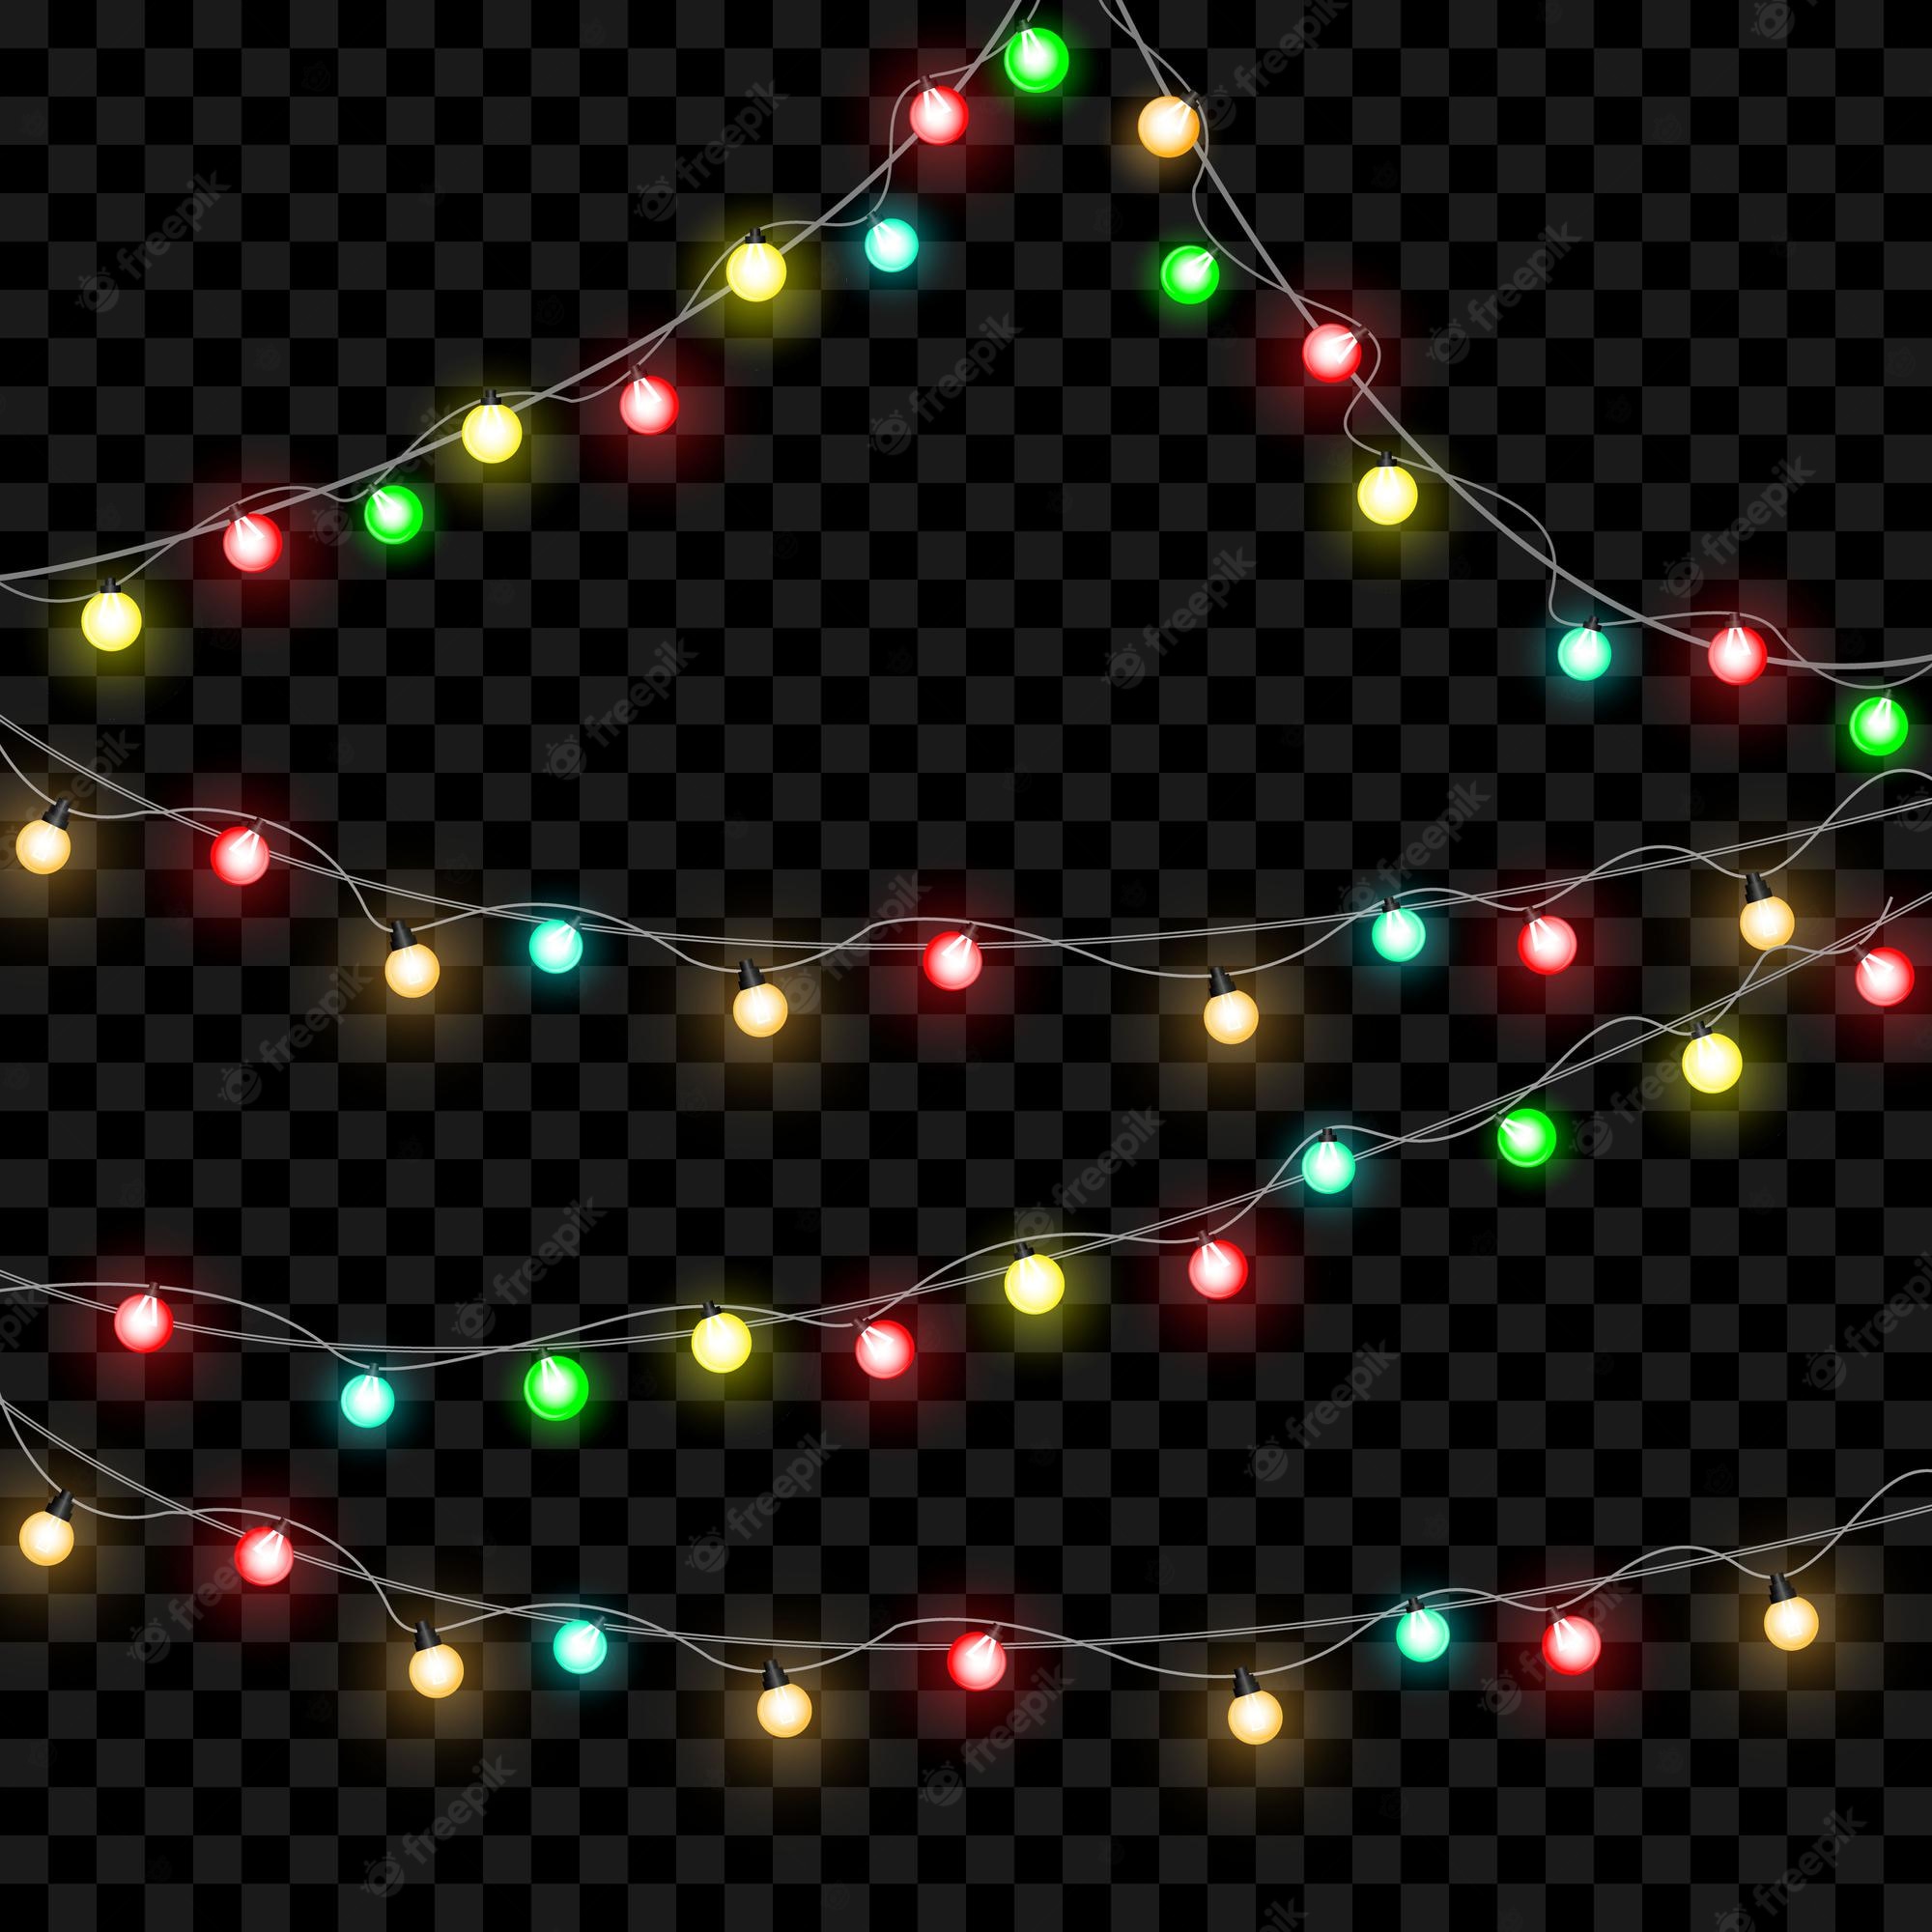 Premium Vector. Christmas lights isolated on transparent background. xmas glowing garland